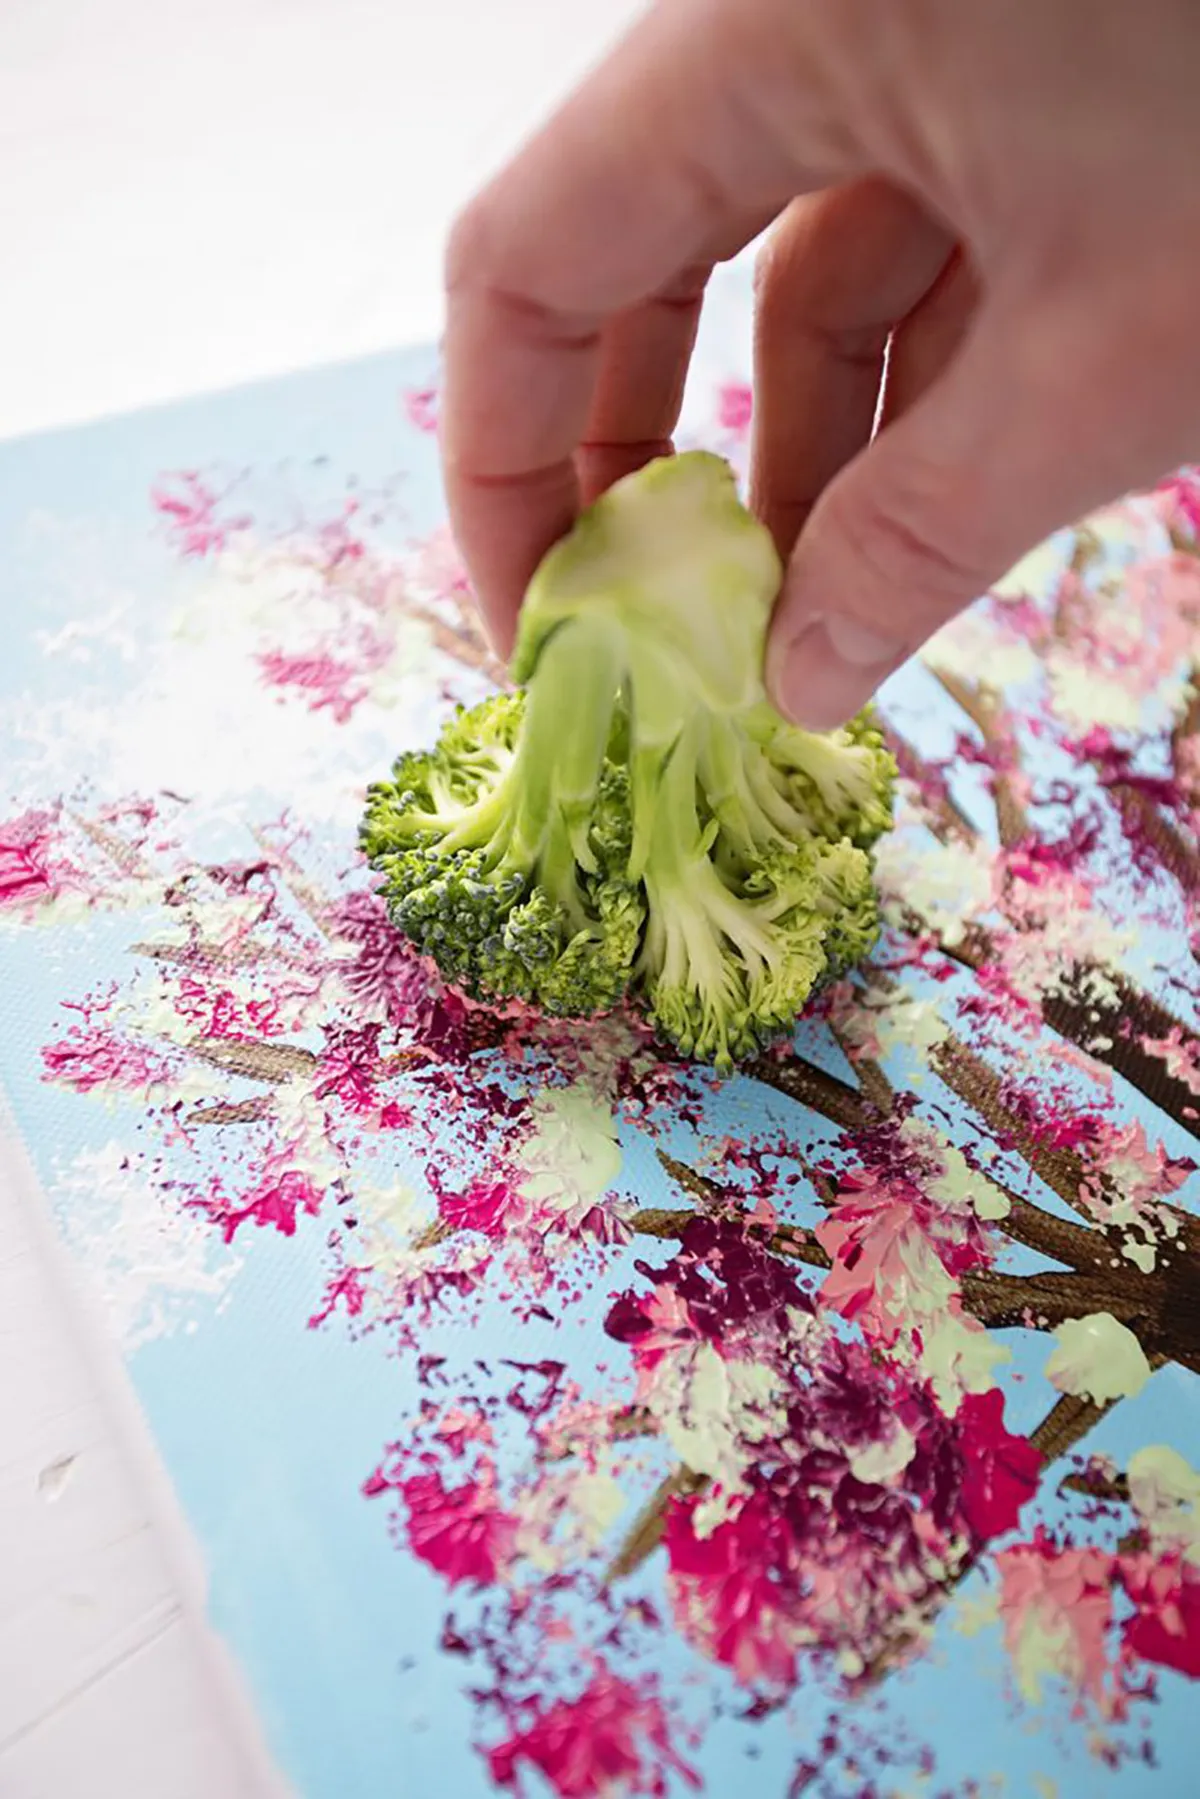 spring crafts for kids - Welcome-to-Nanas-spring-broccoli-painted-tree-art-DIY-tutorial-kids-painting-5-683x1024